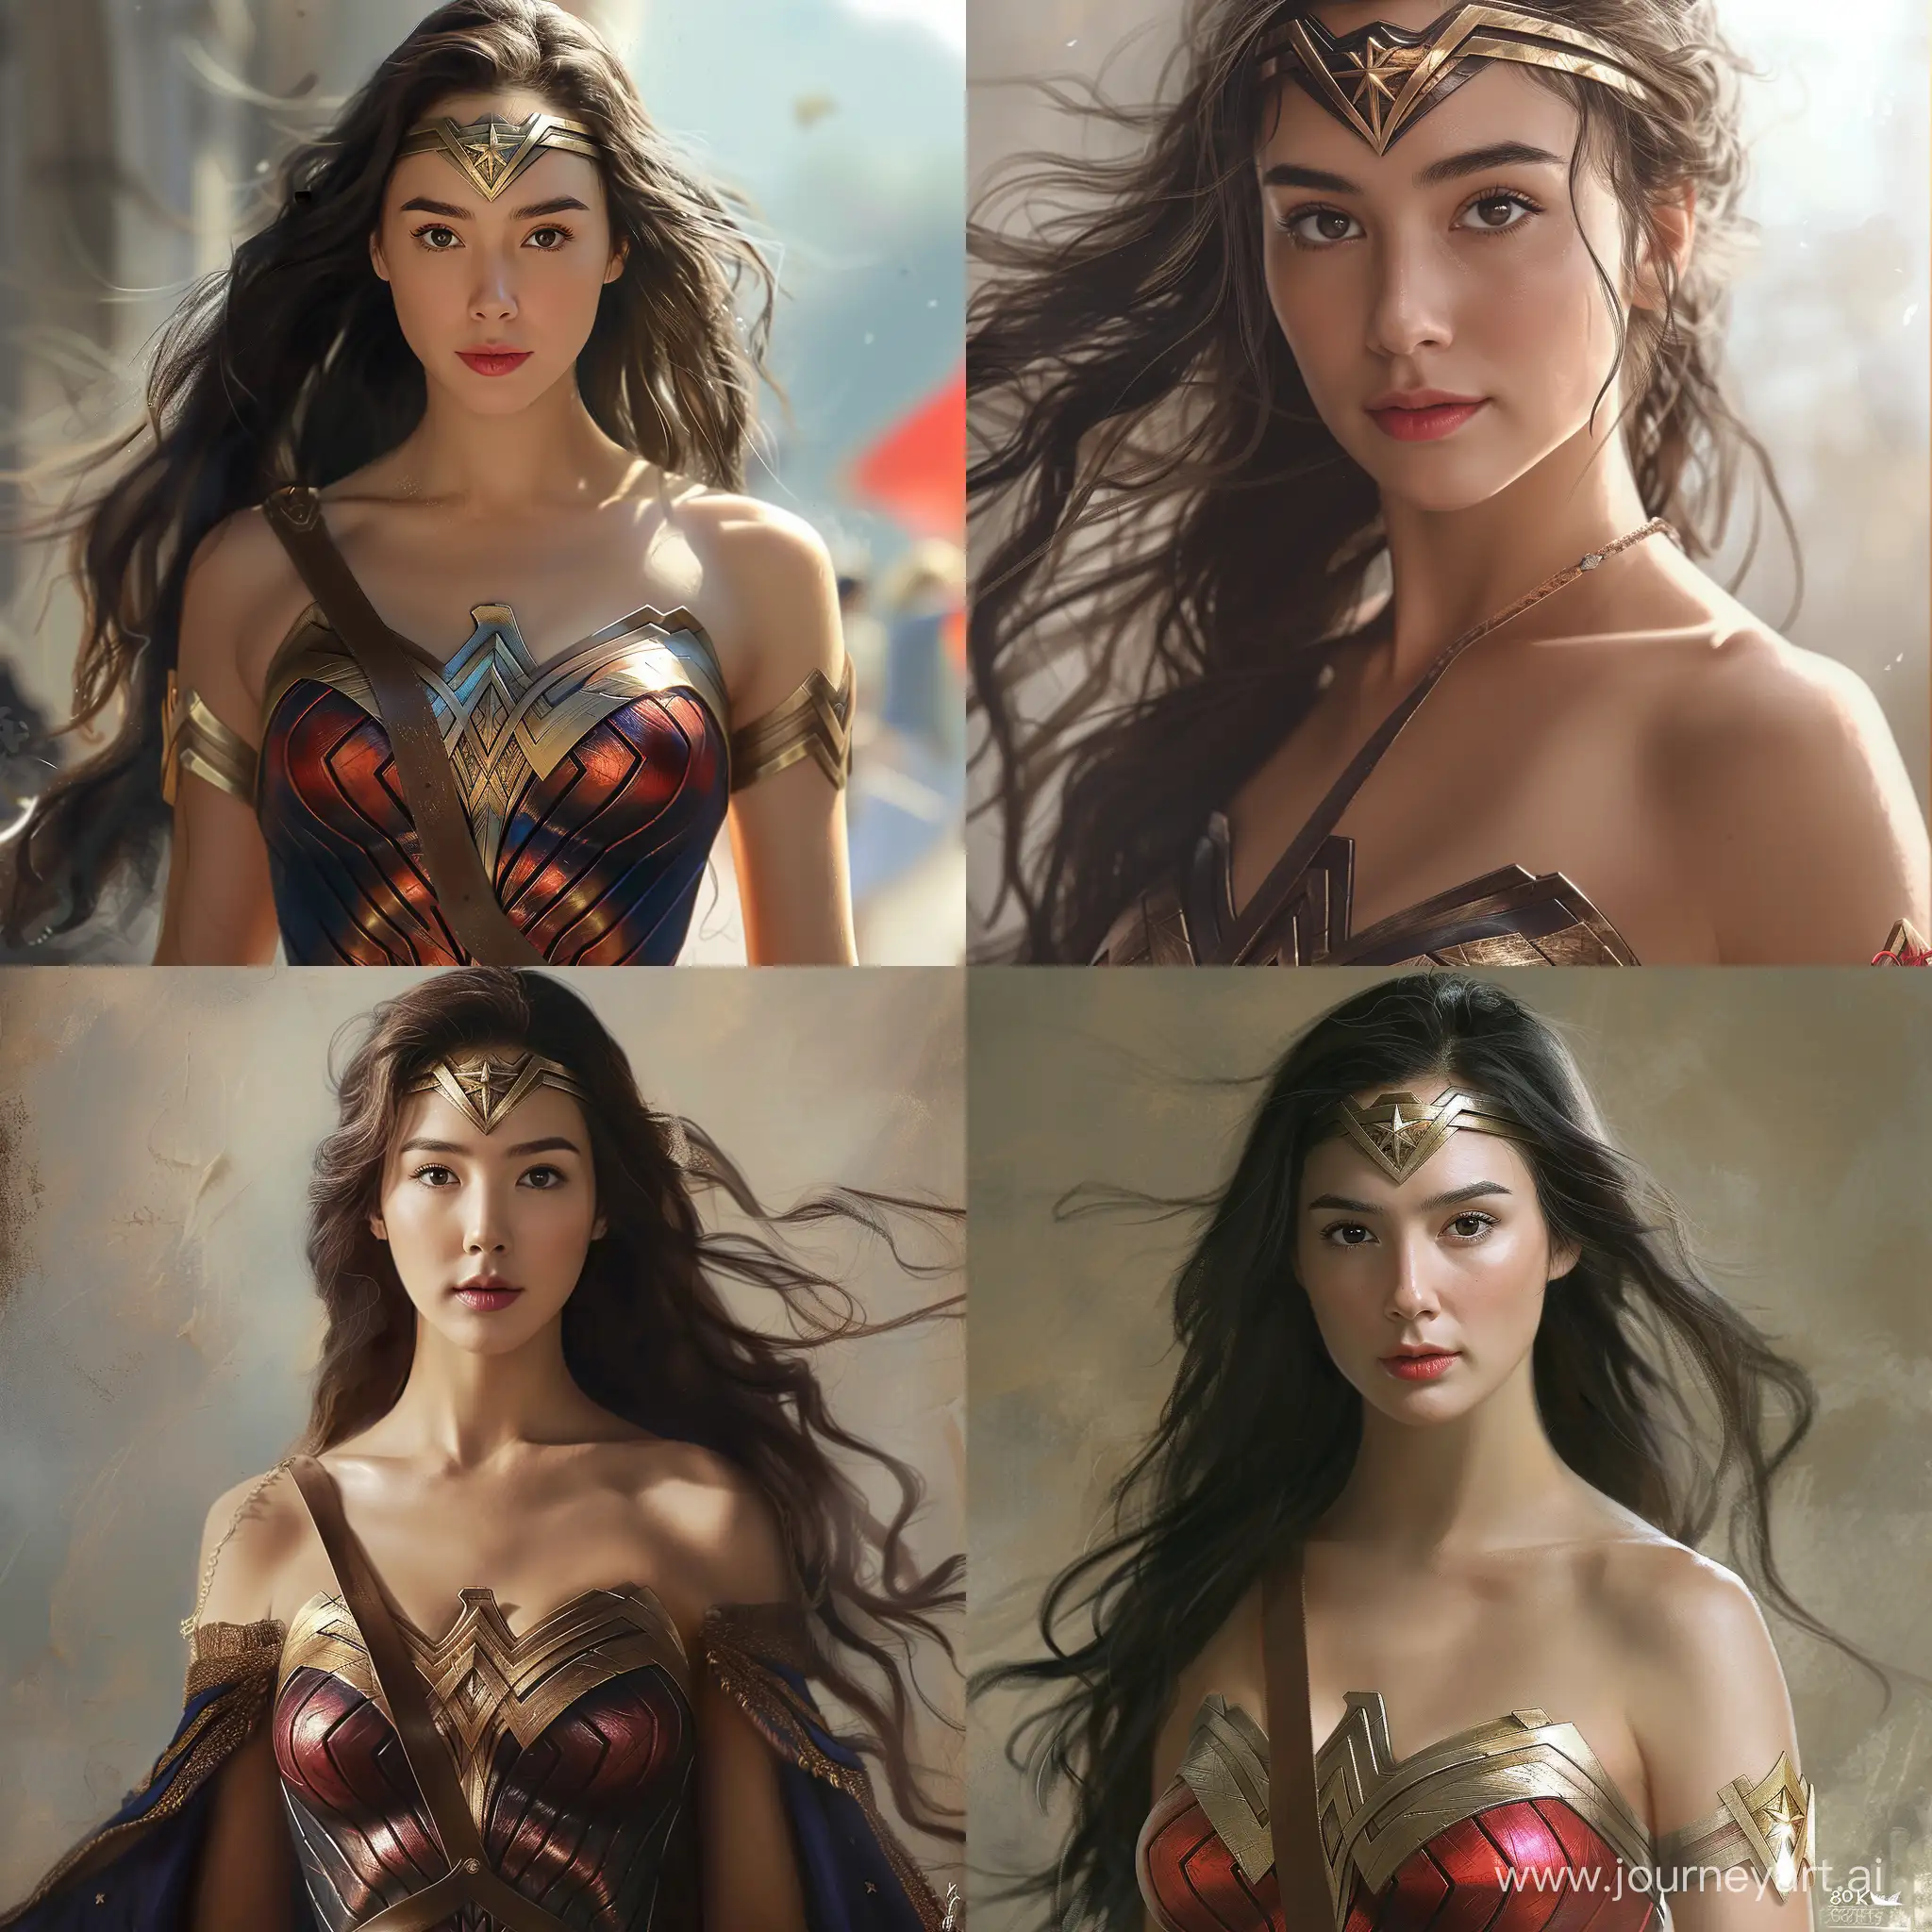 Wonder-Woman-Dress-Up-Delicate-Portrait-of-an-Asian-Actress-with-Super-Clear-Facial-Details